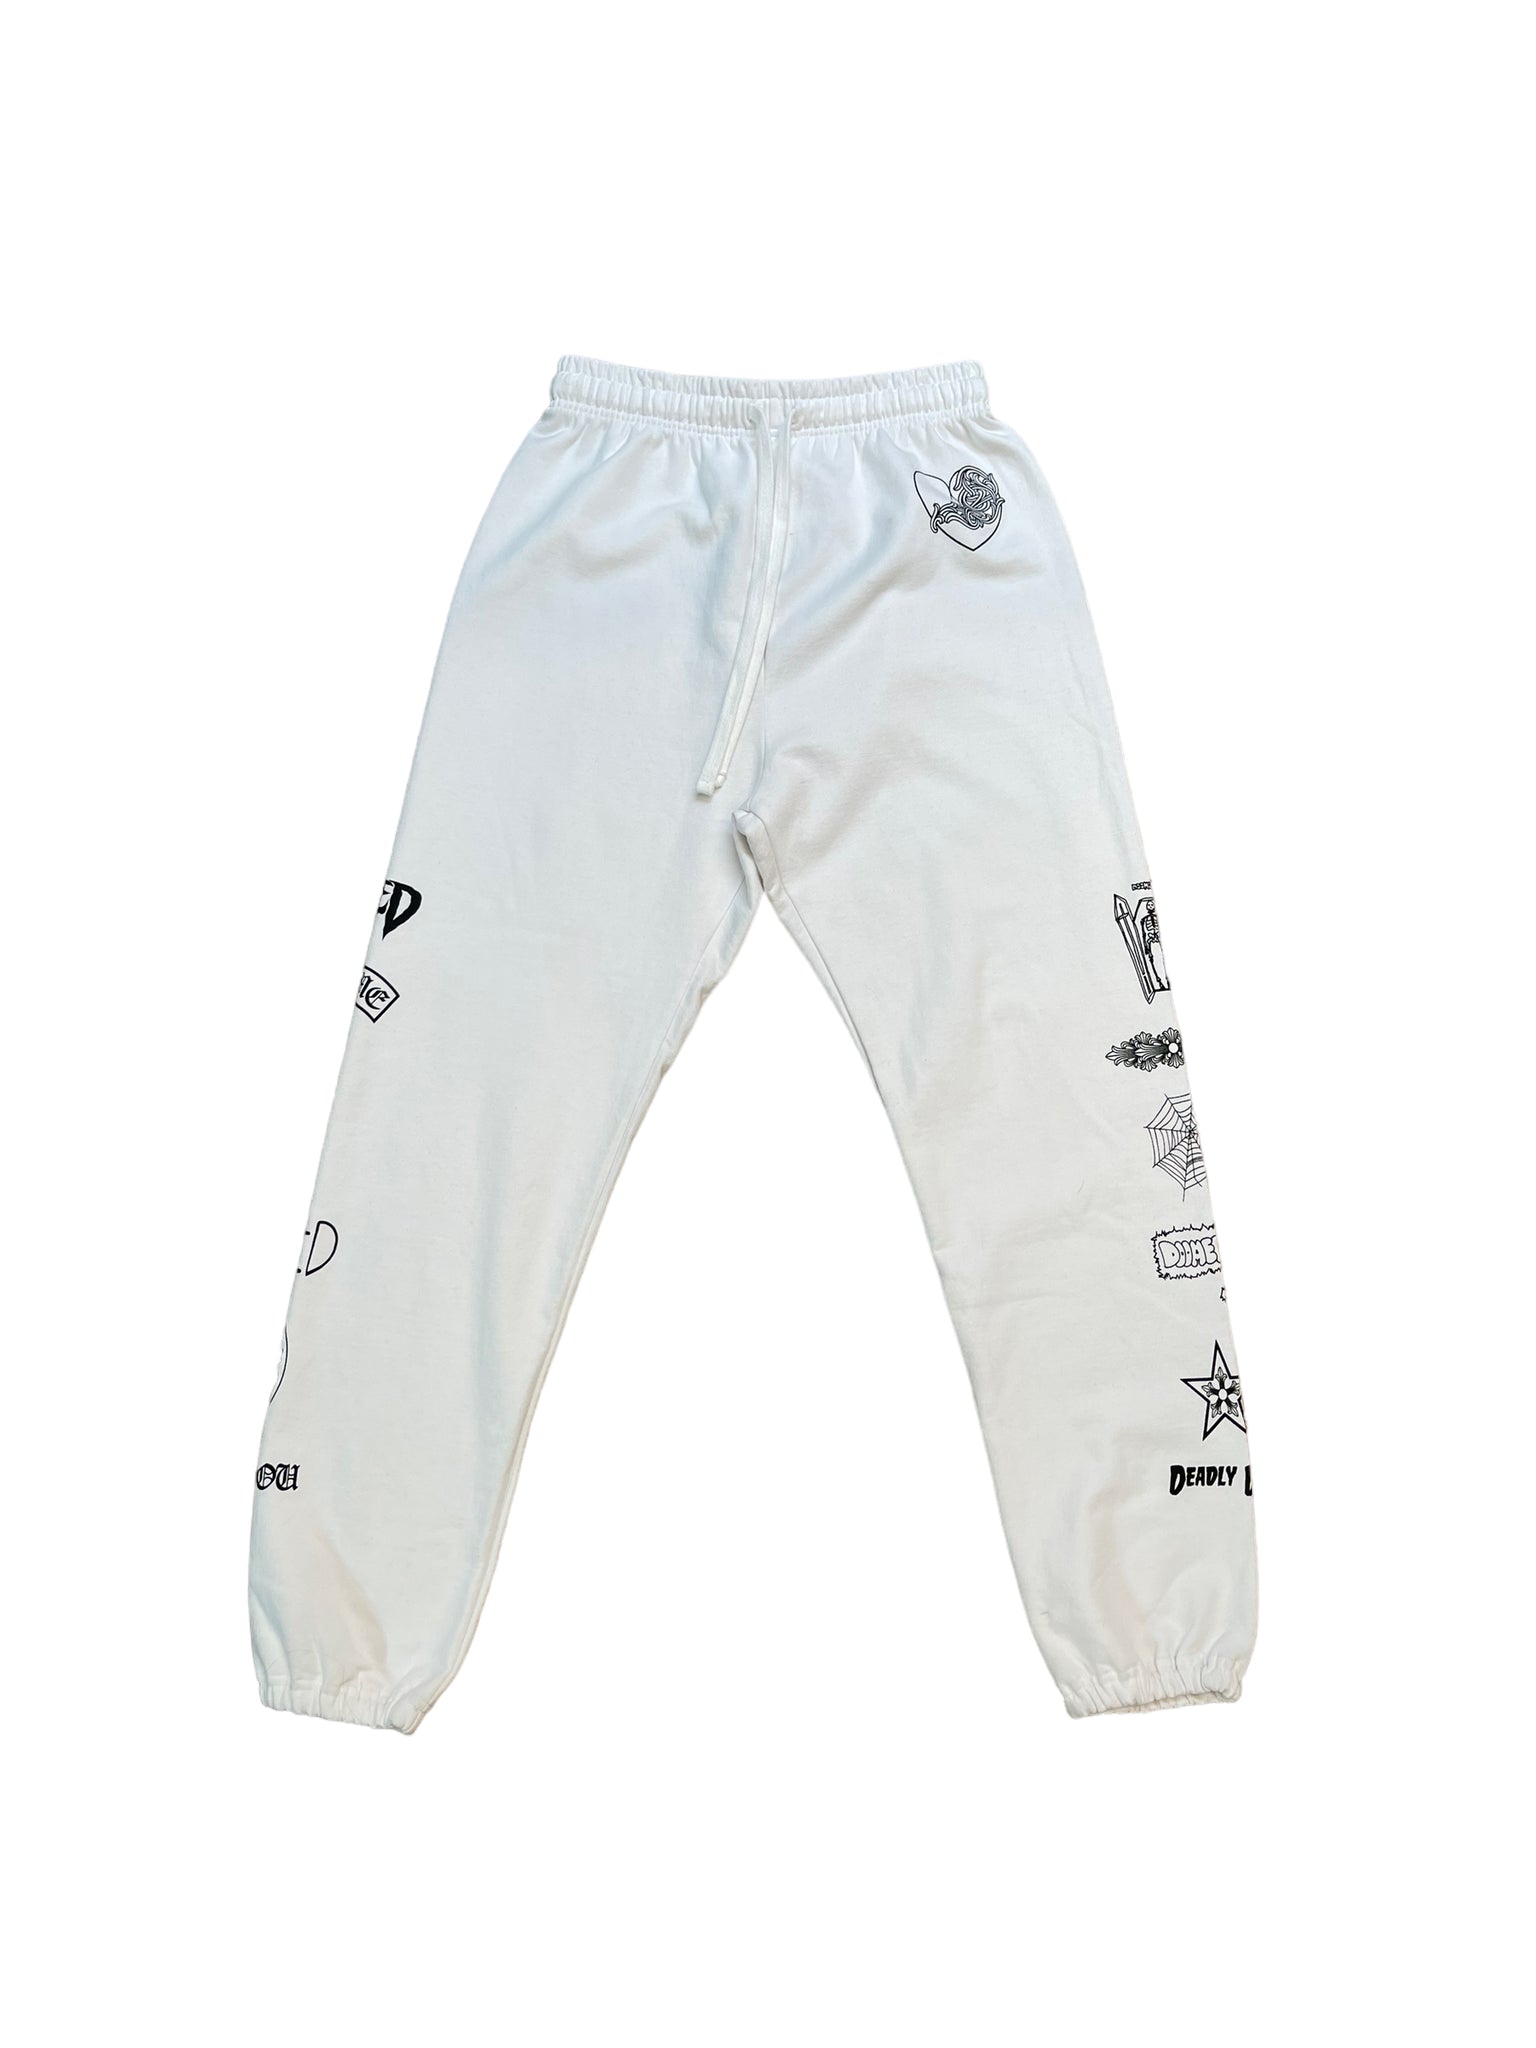 Chrome Hearts Deadly Doll Sweatpants "White"